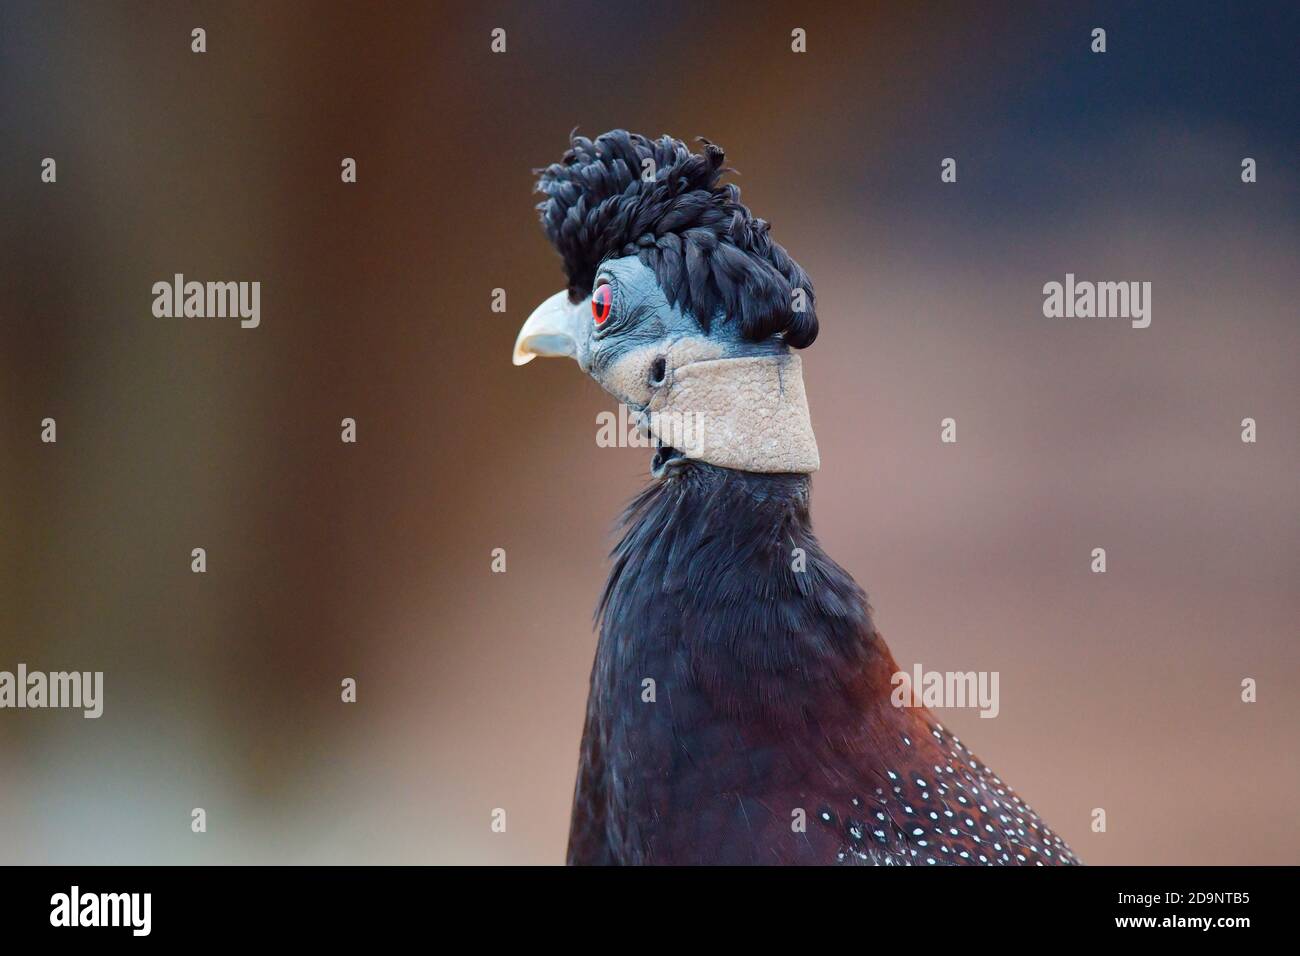 Crested Guineafowl (Guttera pucherani) rear view, uMkhuze Game Reserve, South Africa Stock Photo